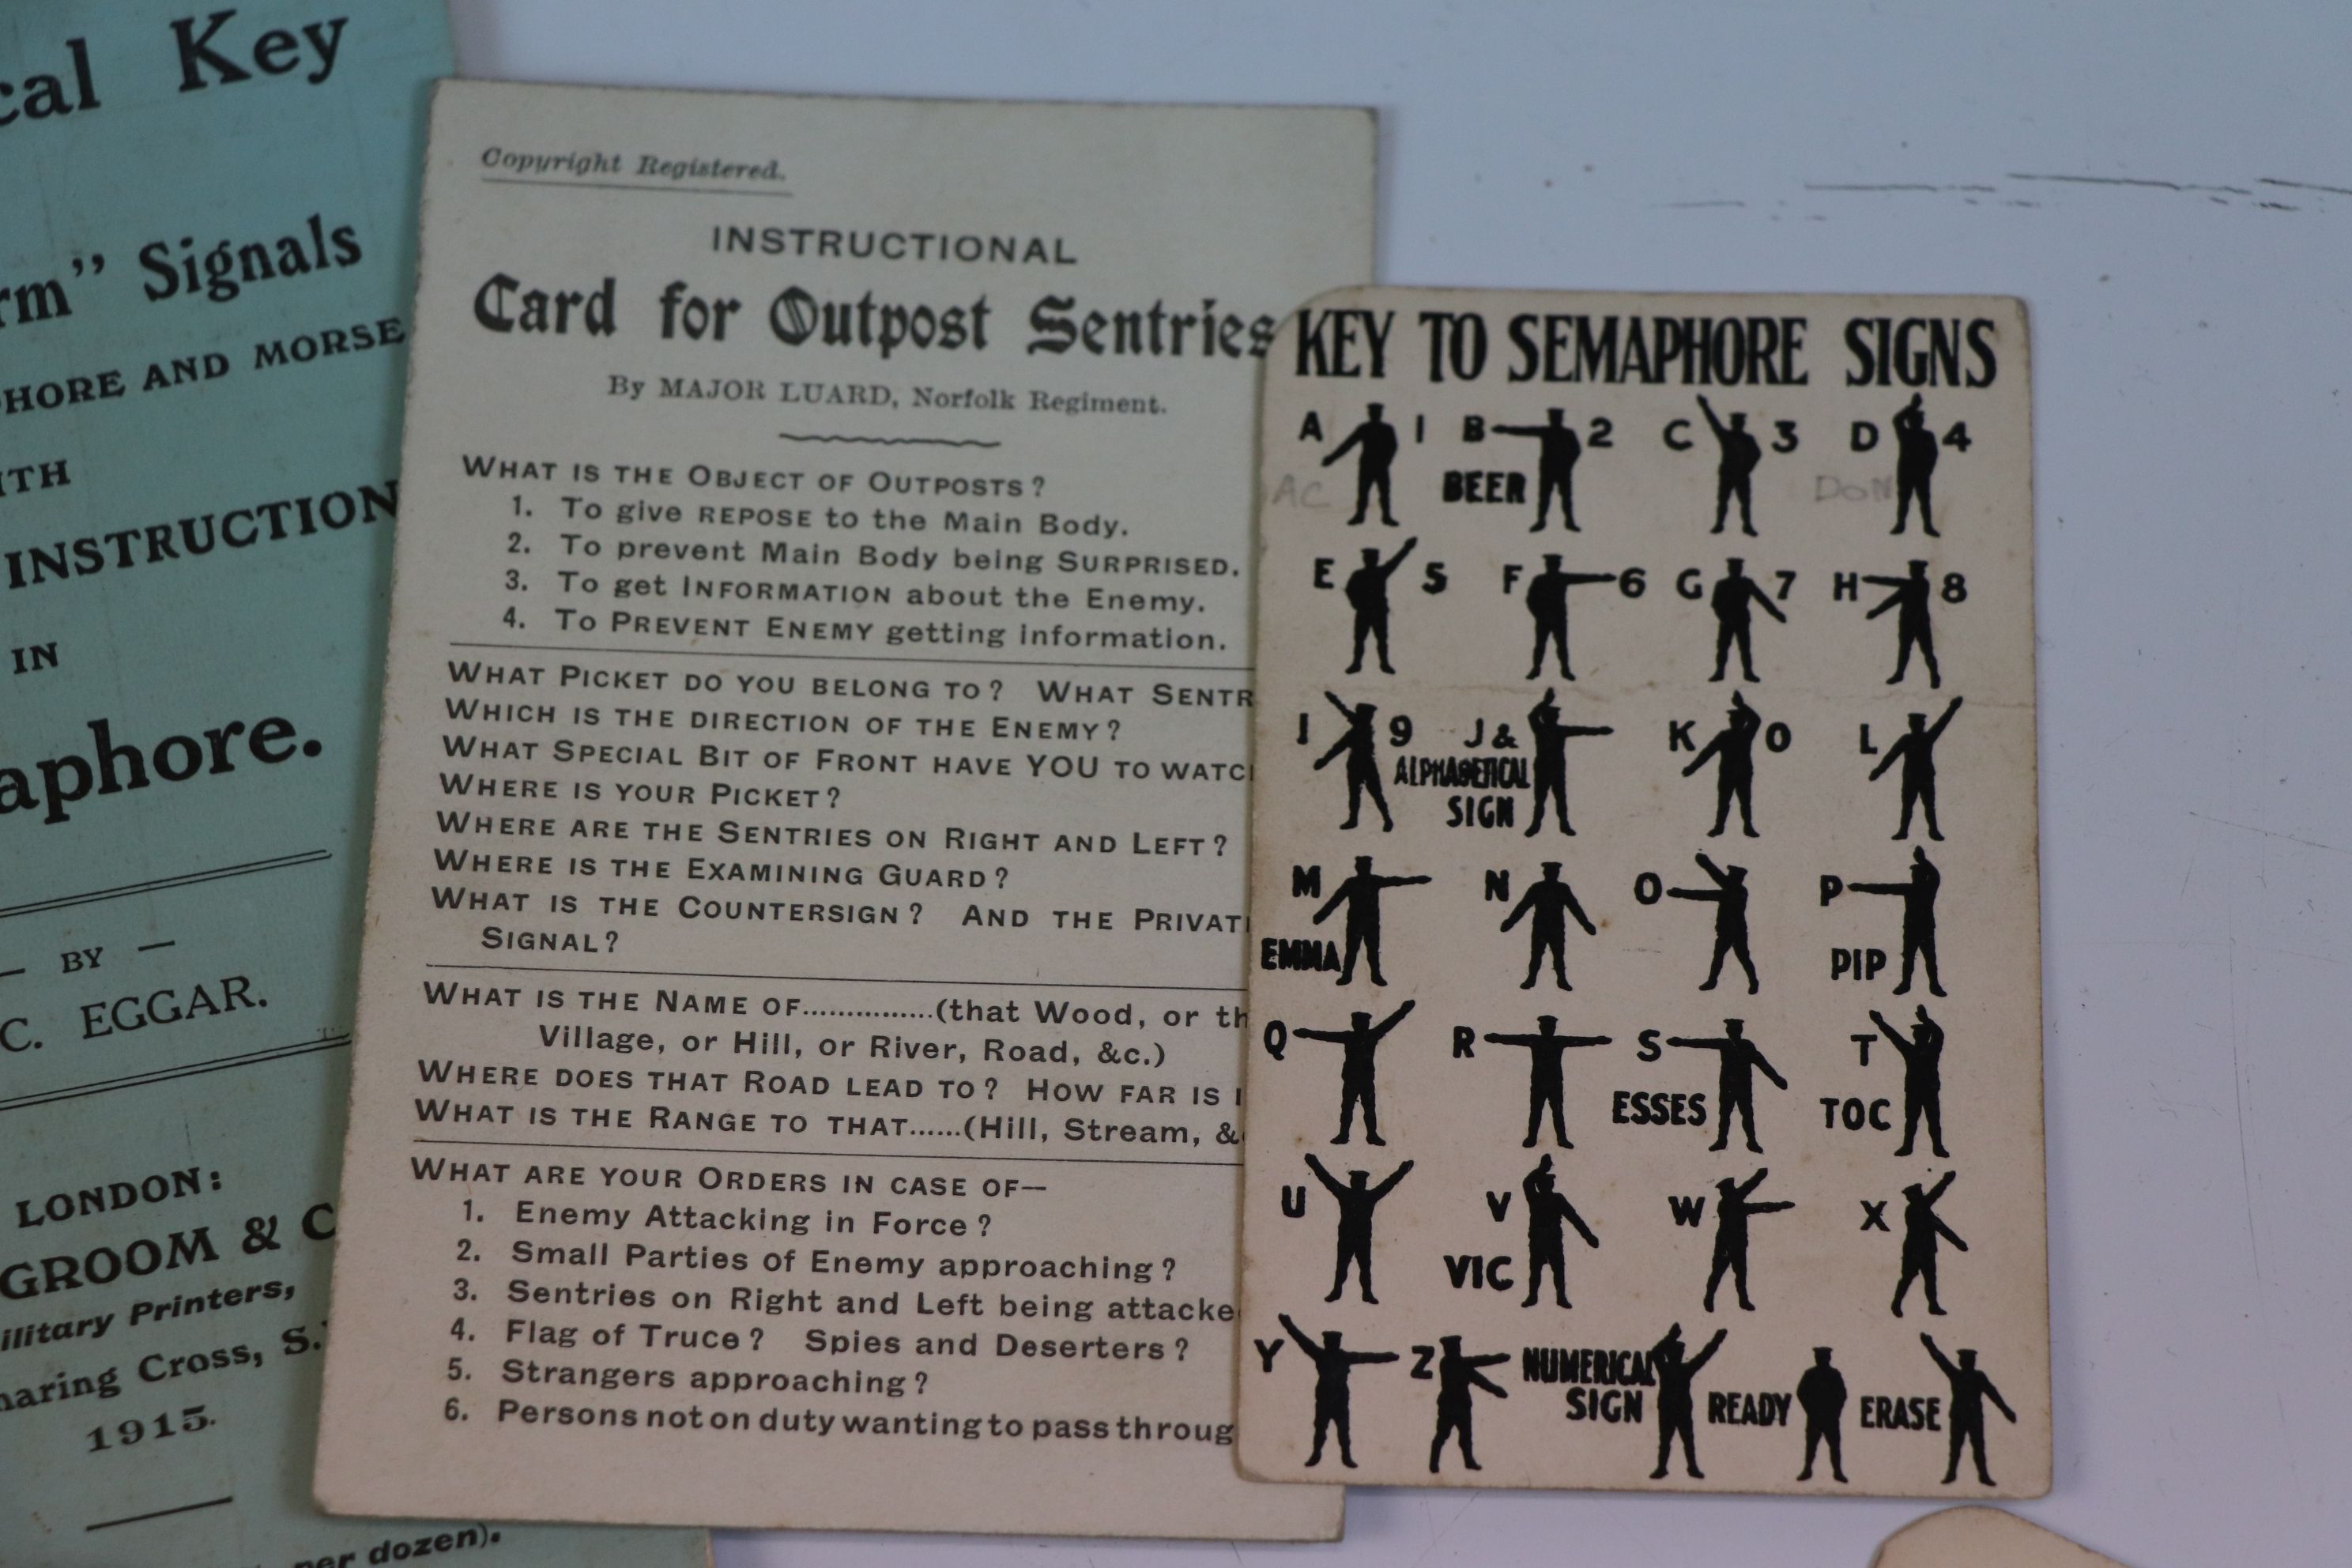 A Complete Set Of Semaphore Sign Cards and Alphabetical Key Instruction Guide. - Image 2 of 2